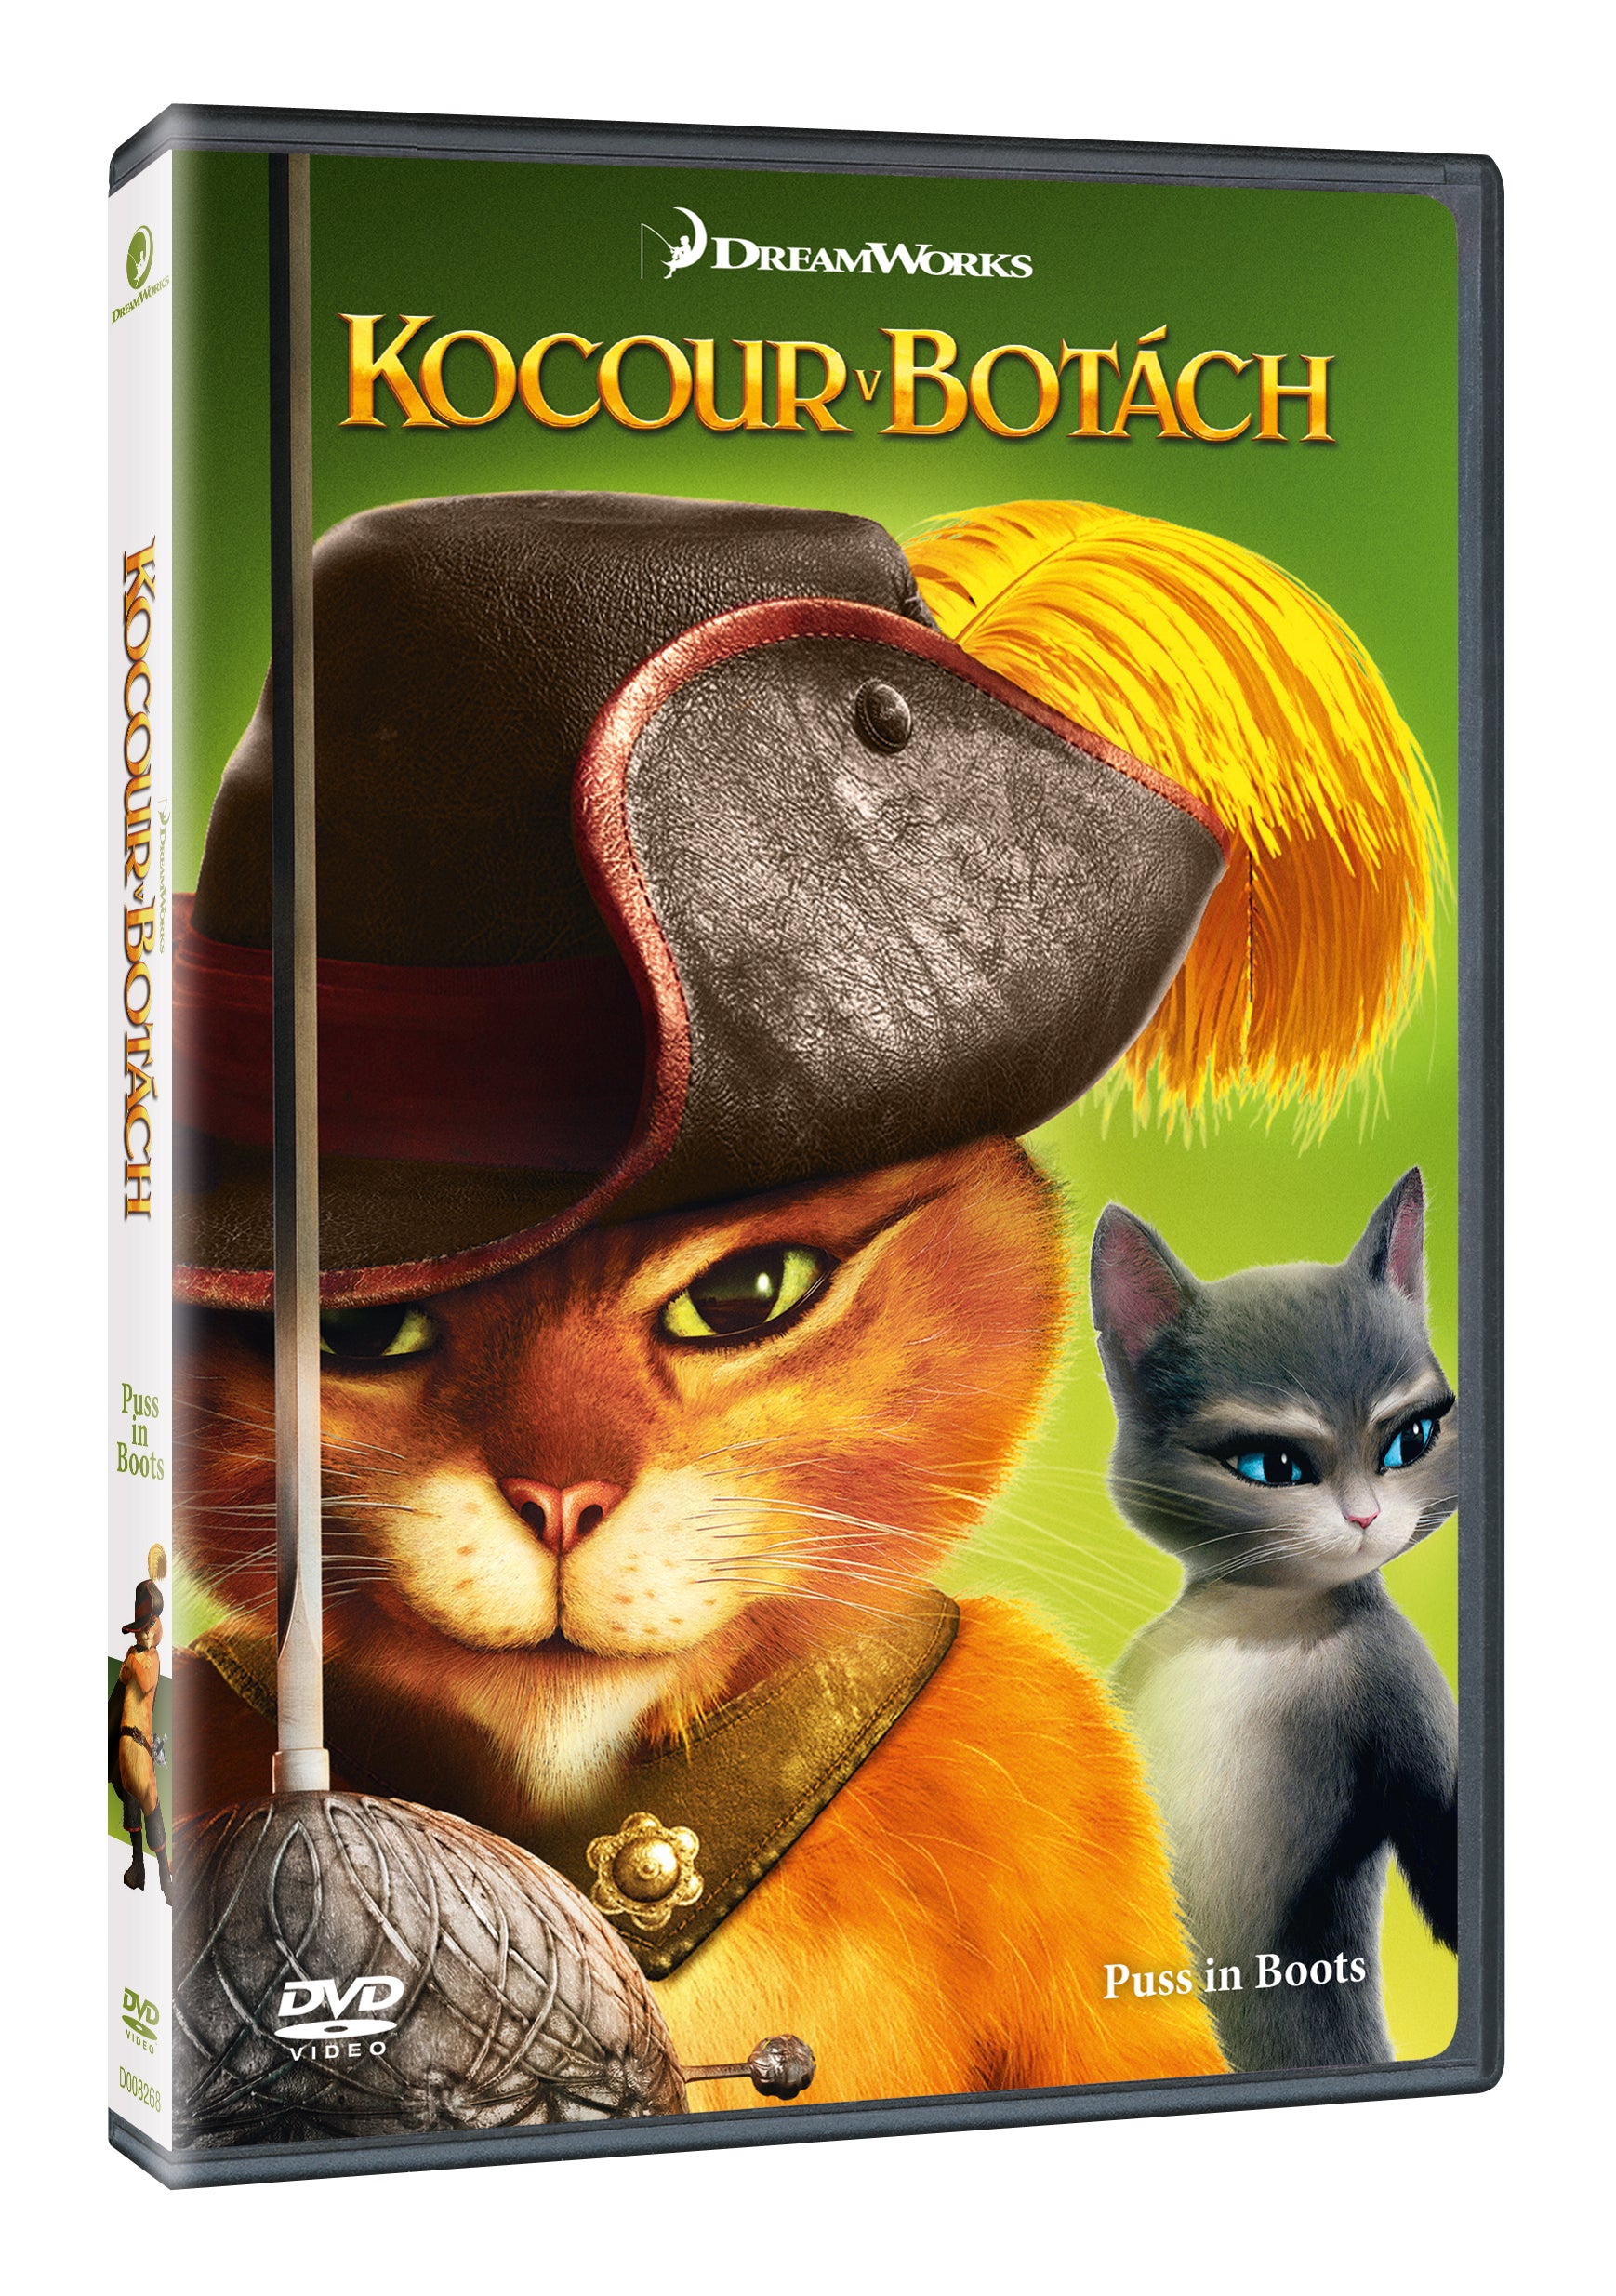 Kocour v botach DVD / Puss in Boots